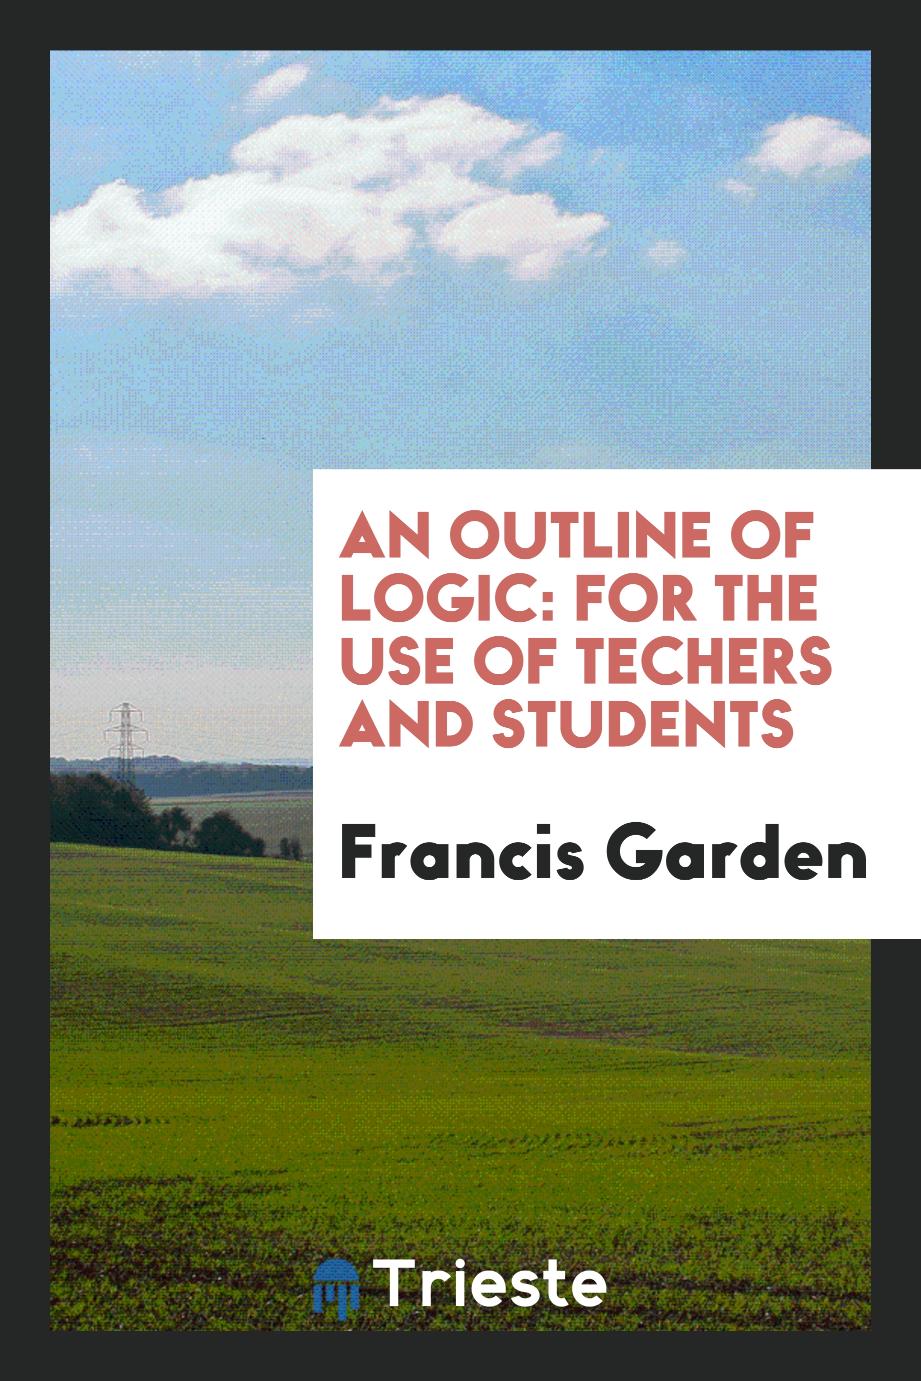 An Outline of Logic: For the Use of Techers and Students